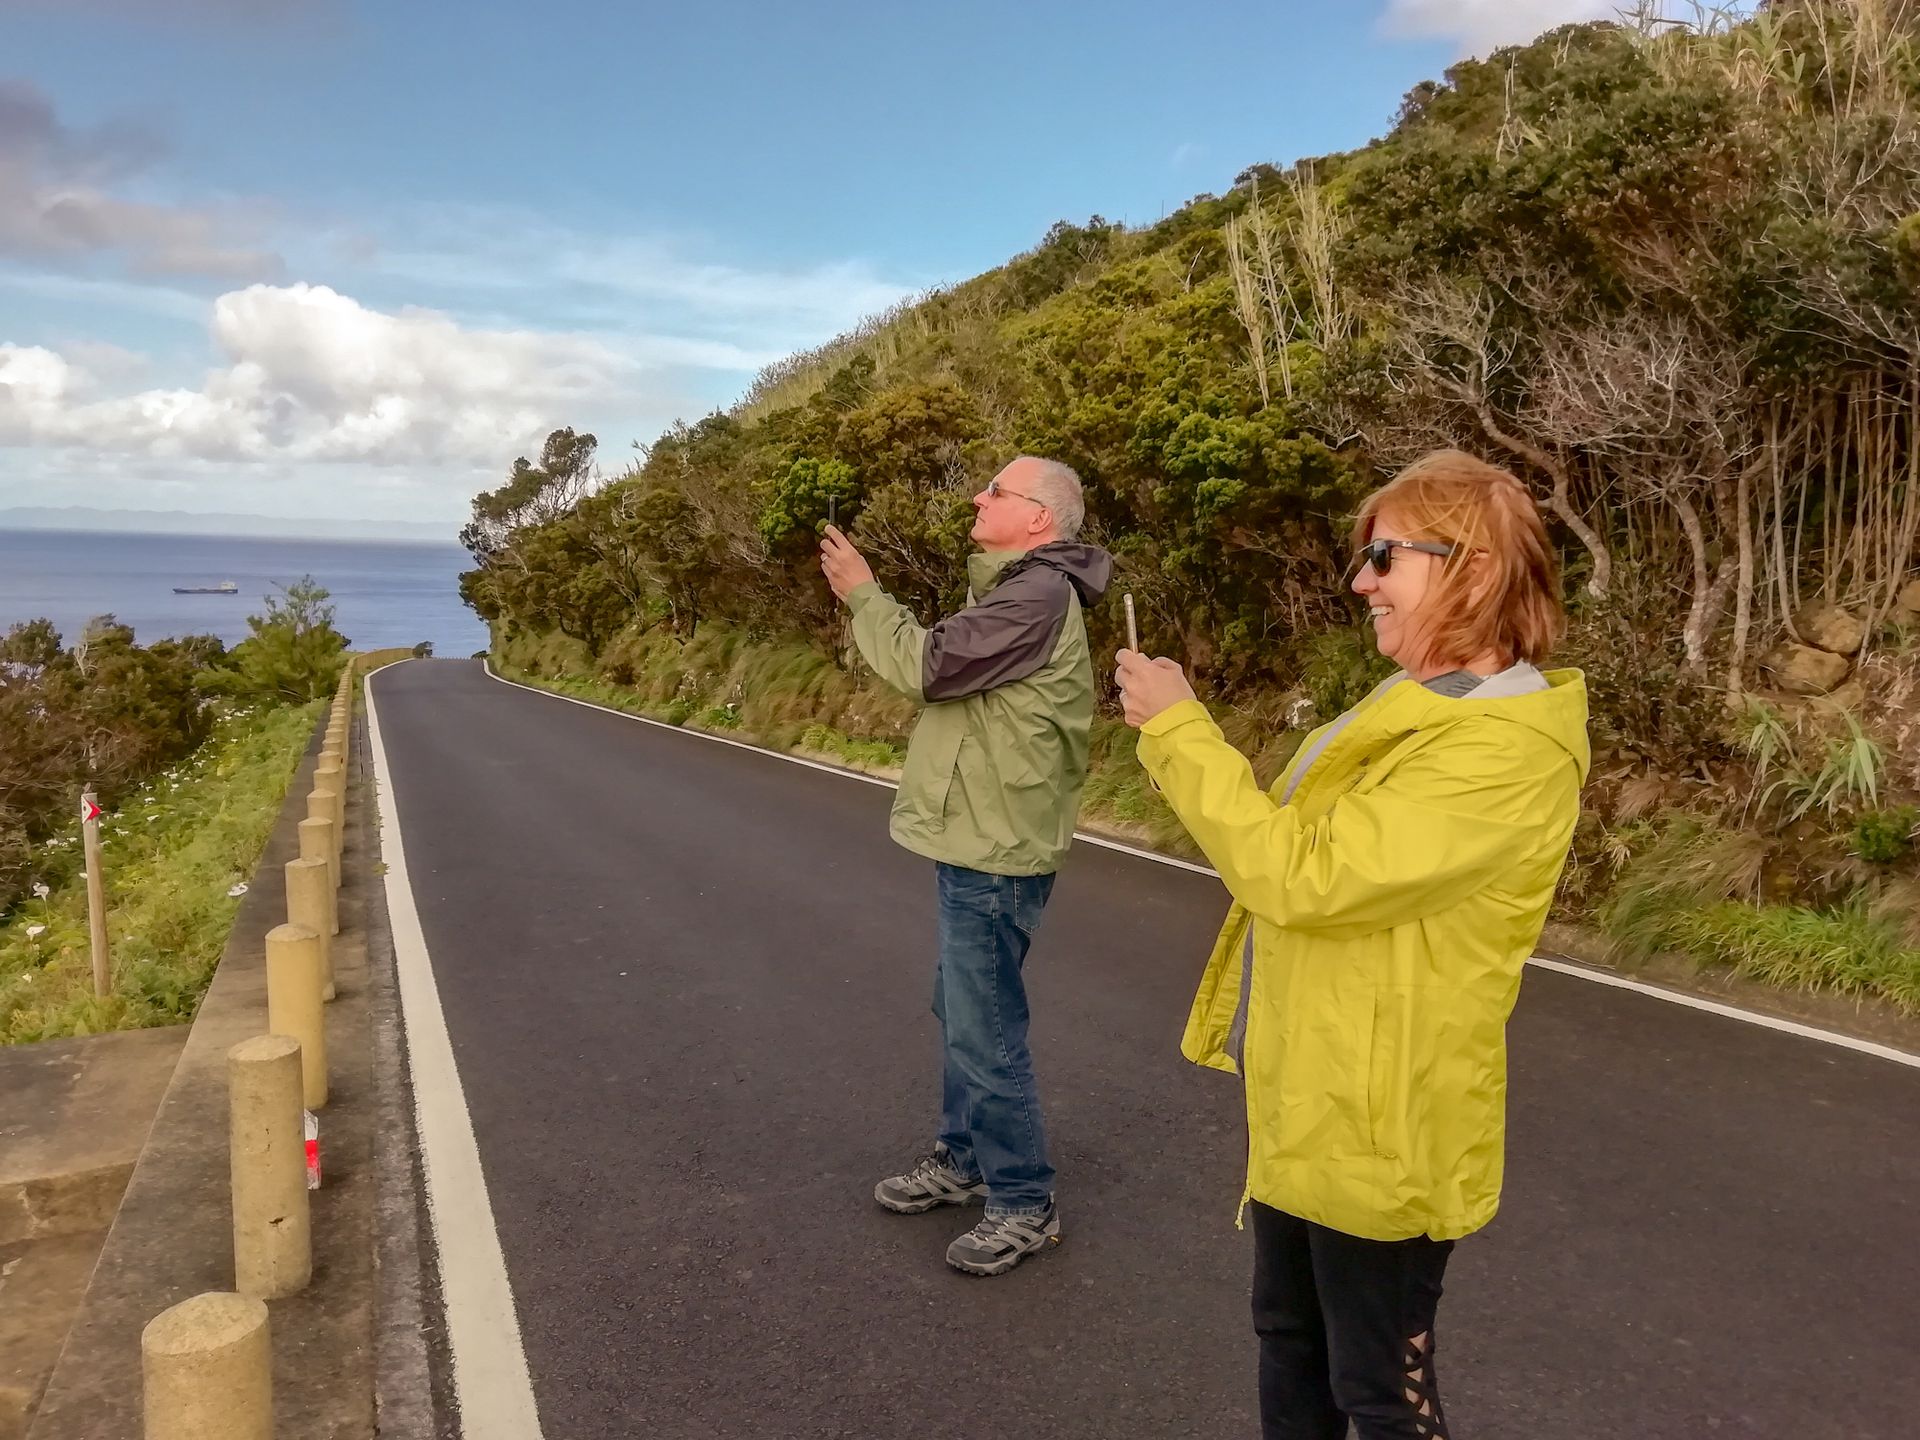 Full-day Excursions, Tours and Guided Visits on the island of Faial Azores.